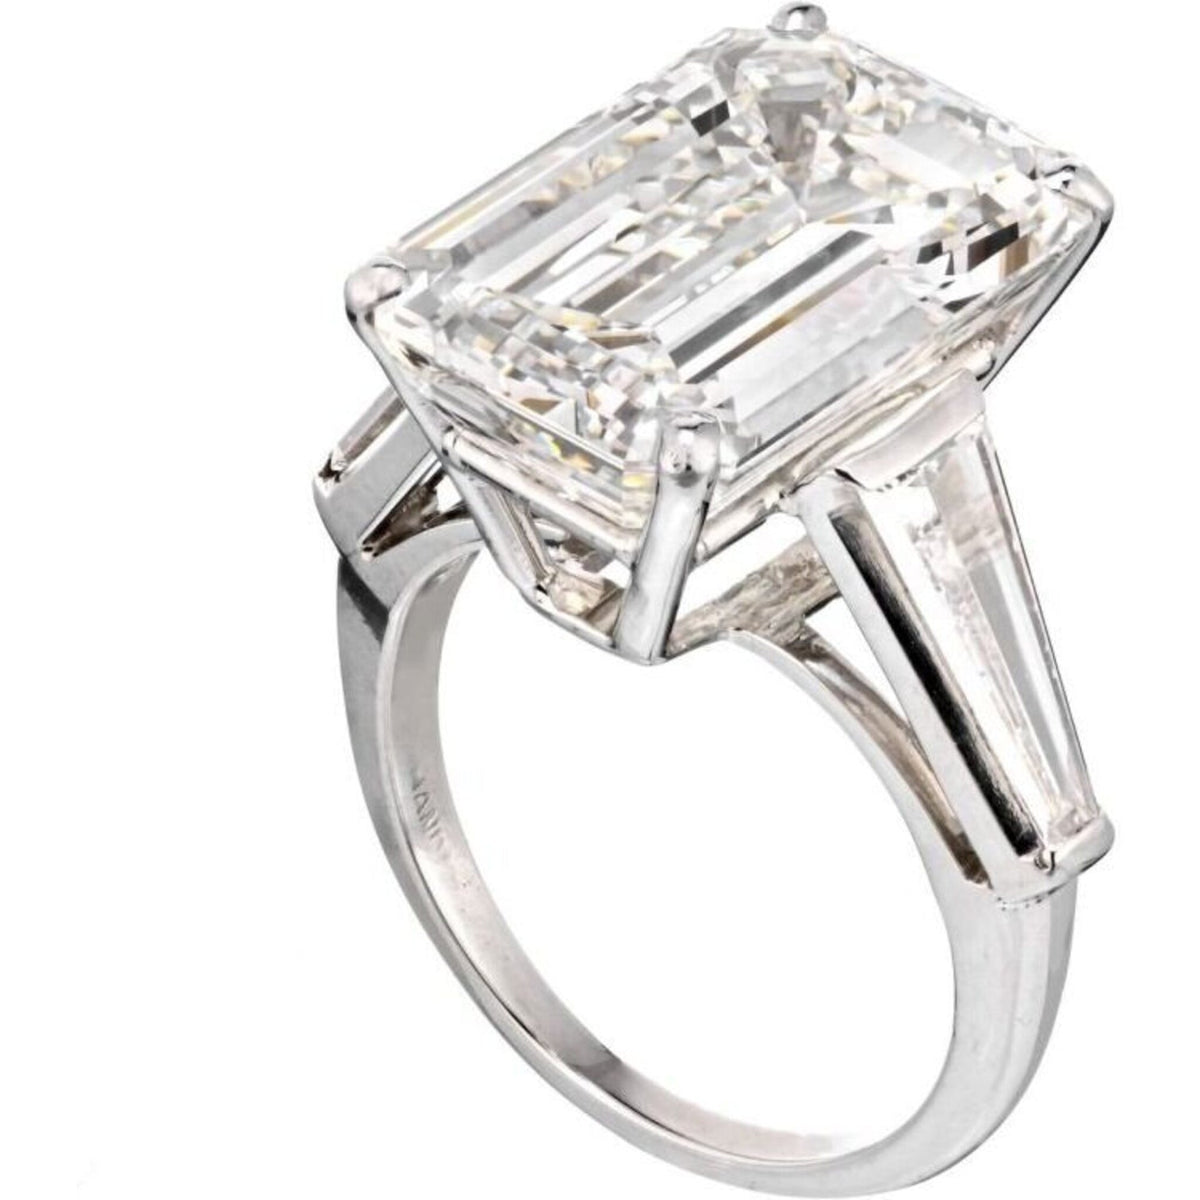 Stunning 1.1 carat emerald cut diamond engagement ring certified by GIA